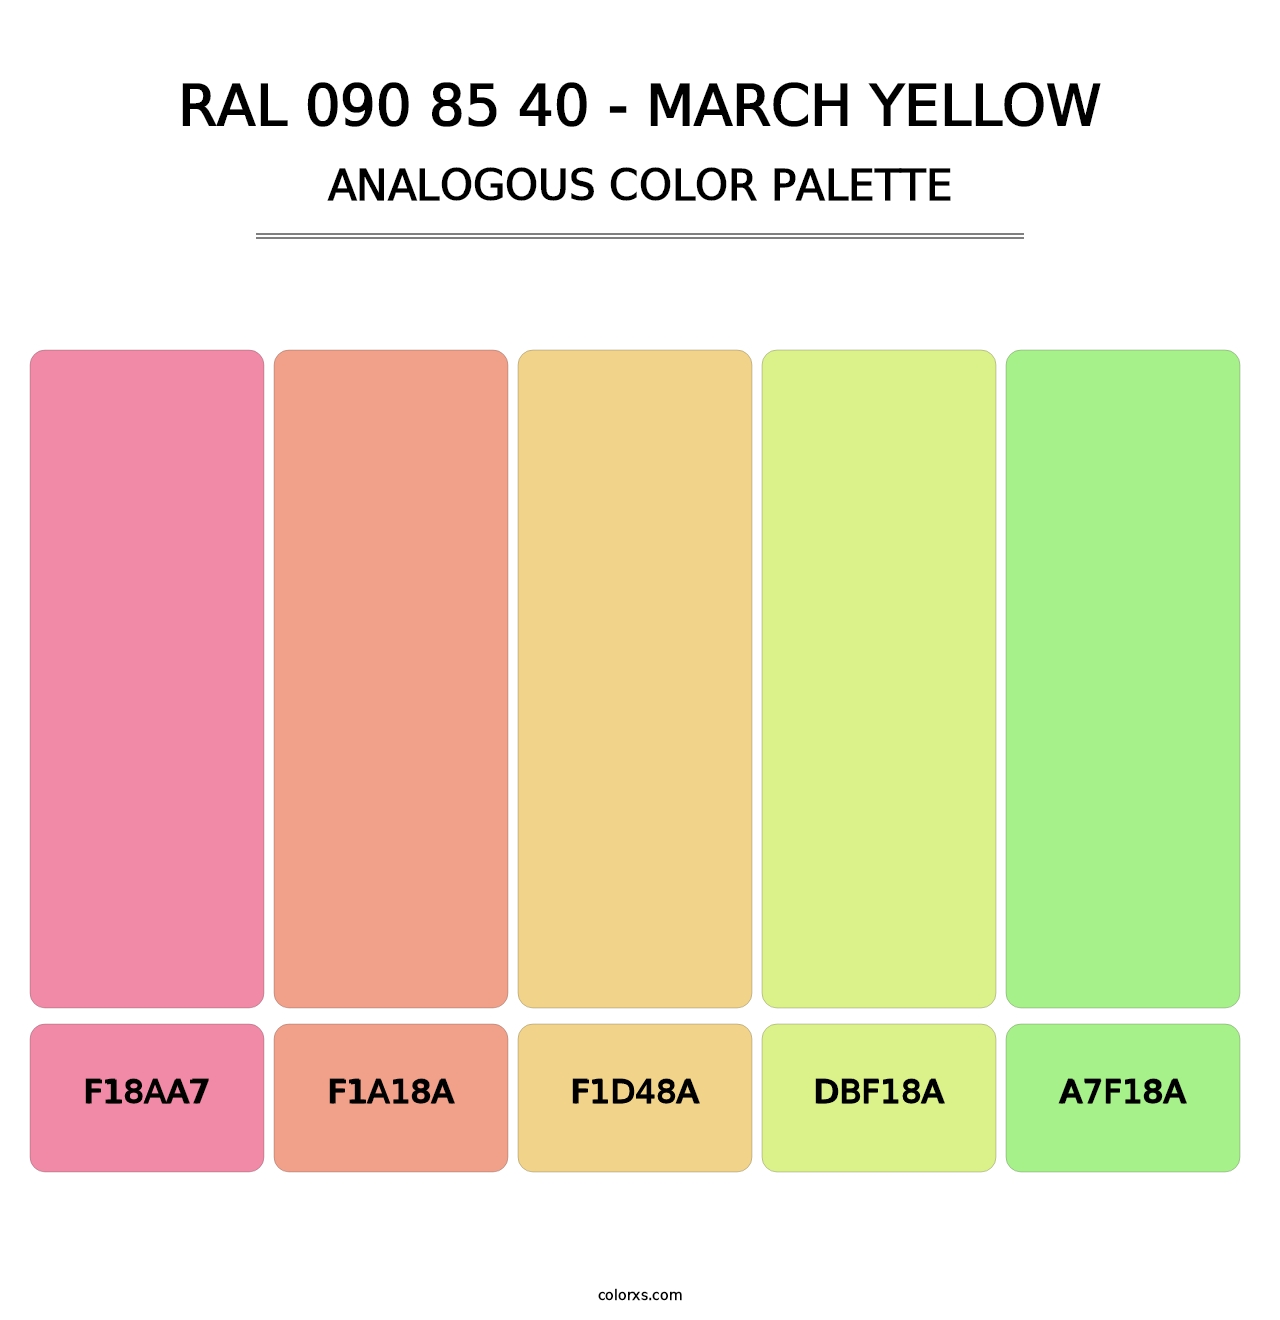 RAL 090 85 40 - March Yellow - Analogous Color Palette